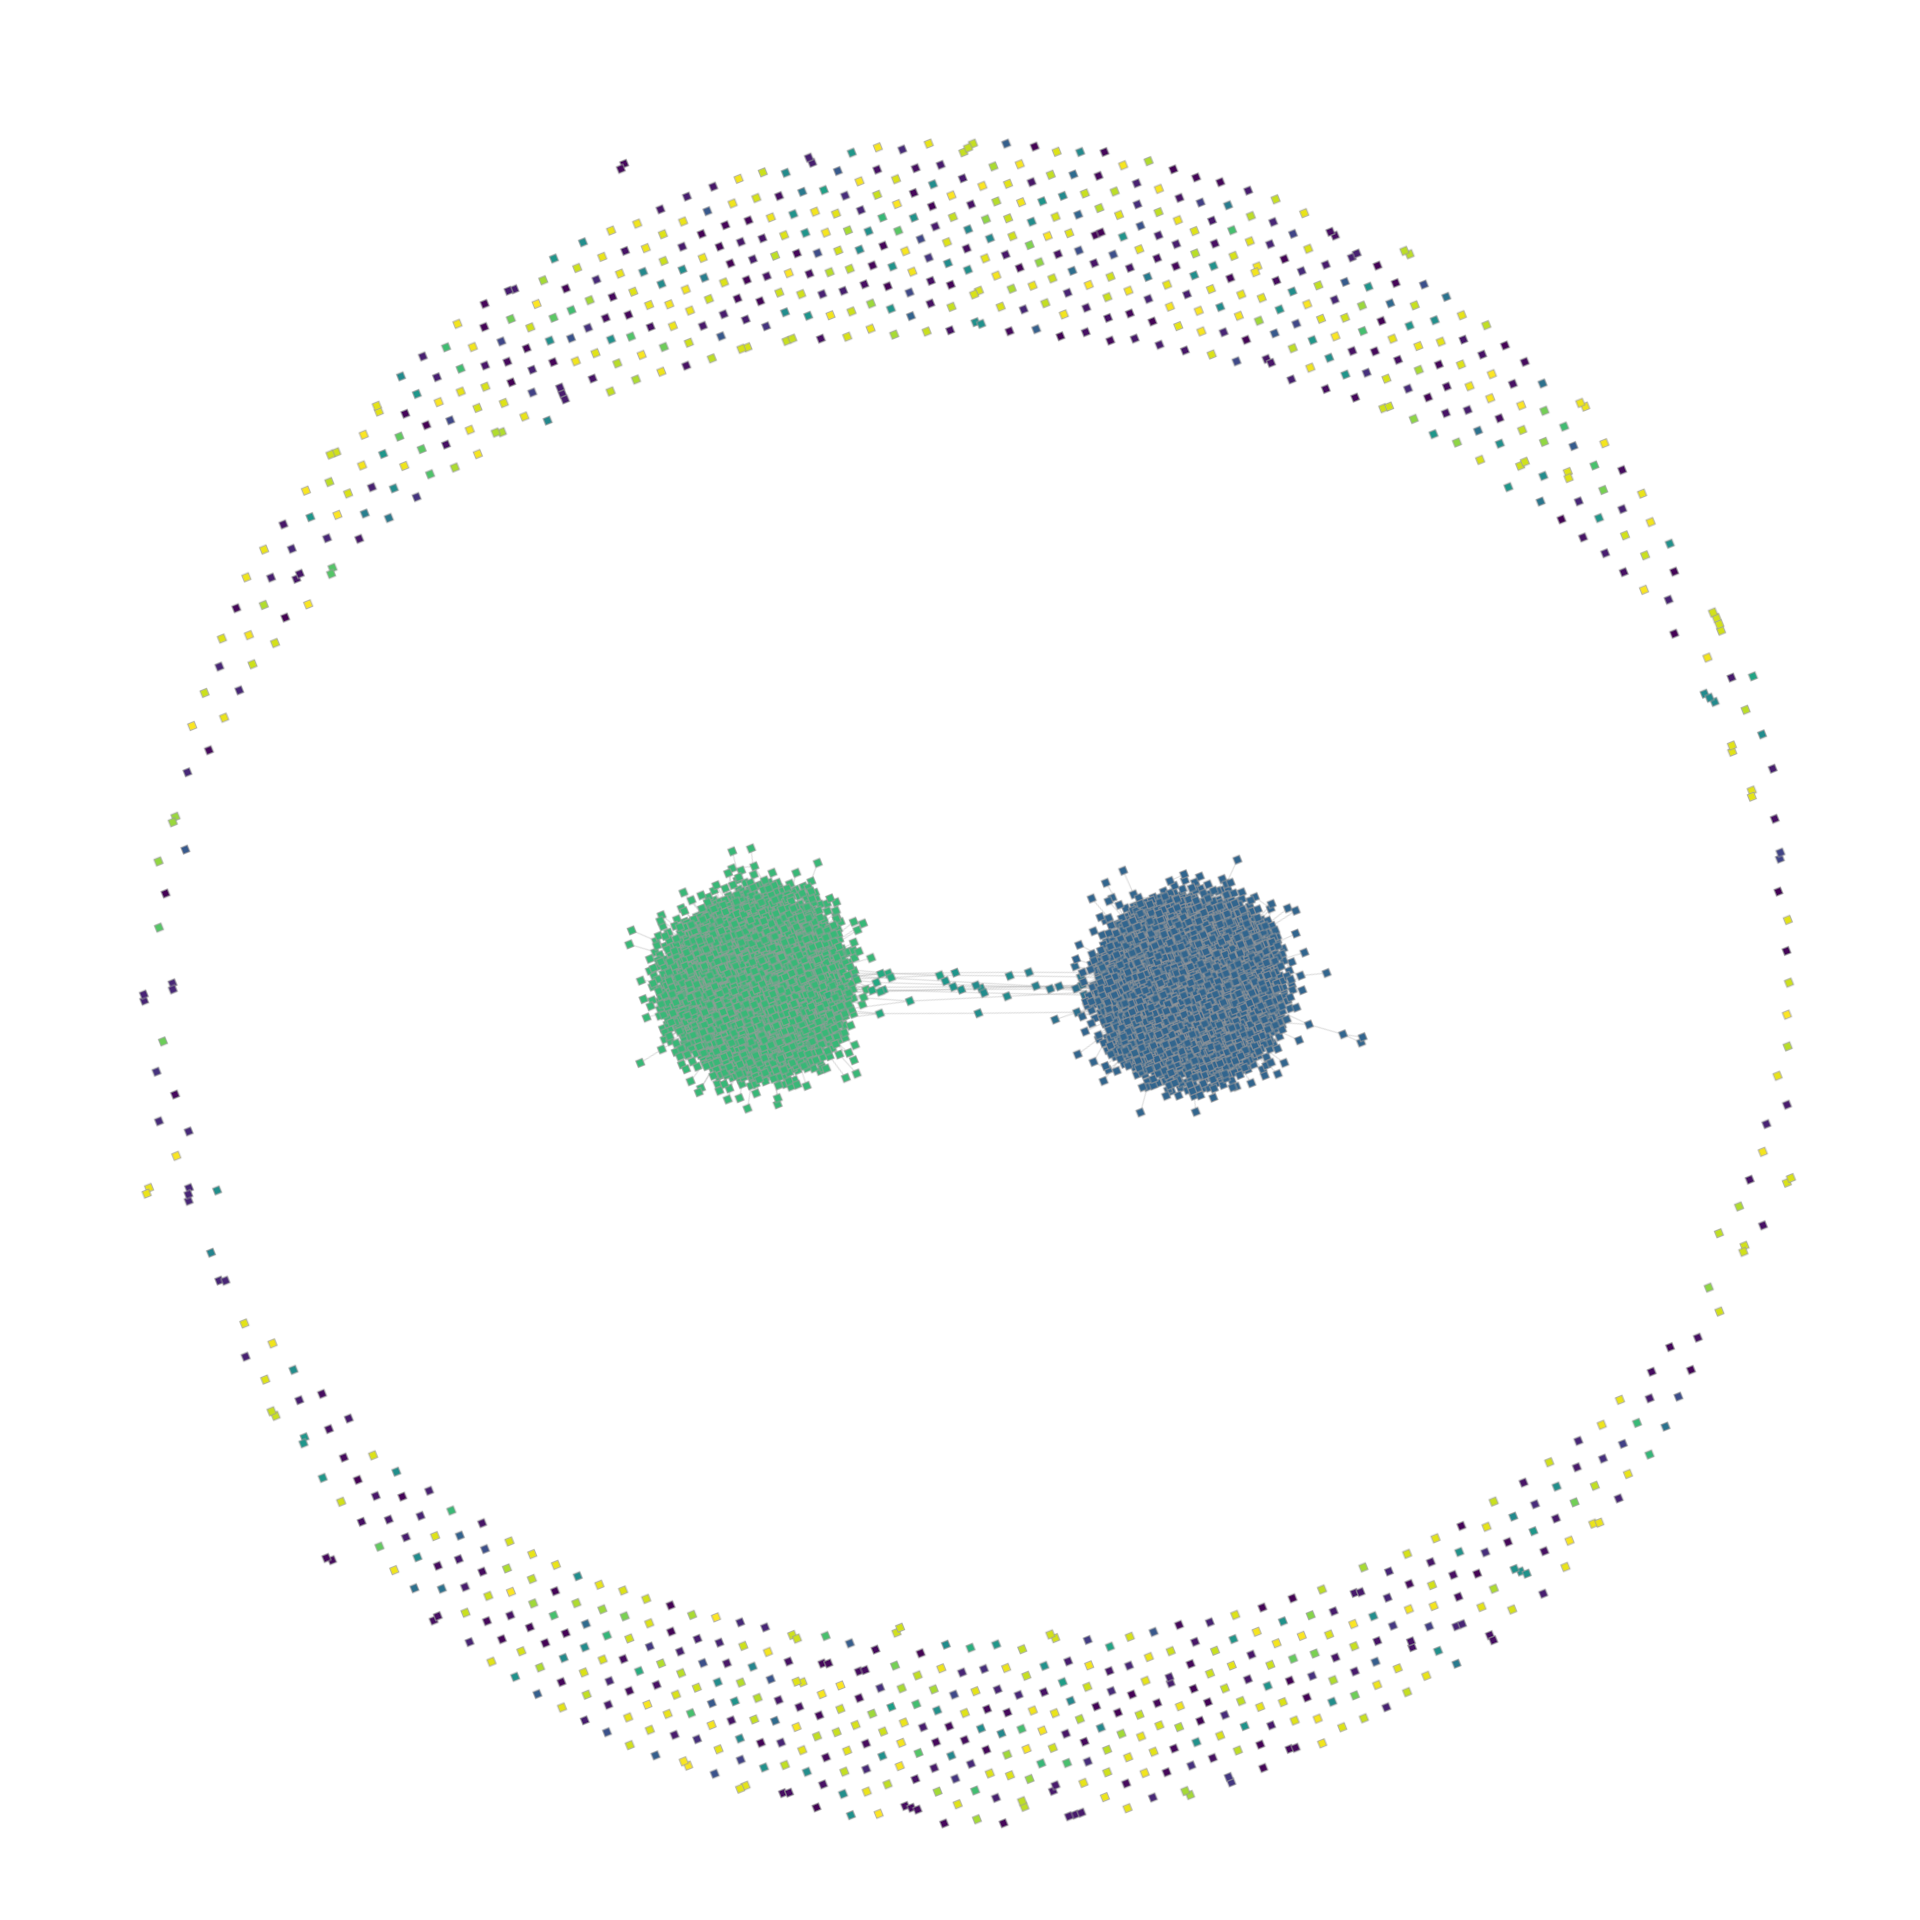 Graph state visualized with graph-tool